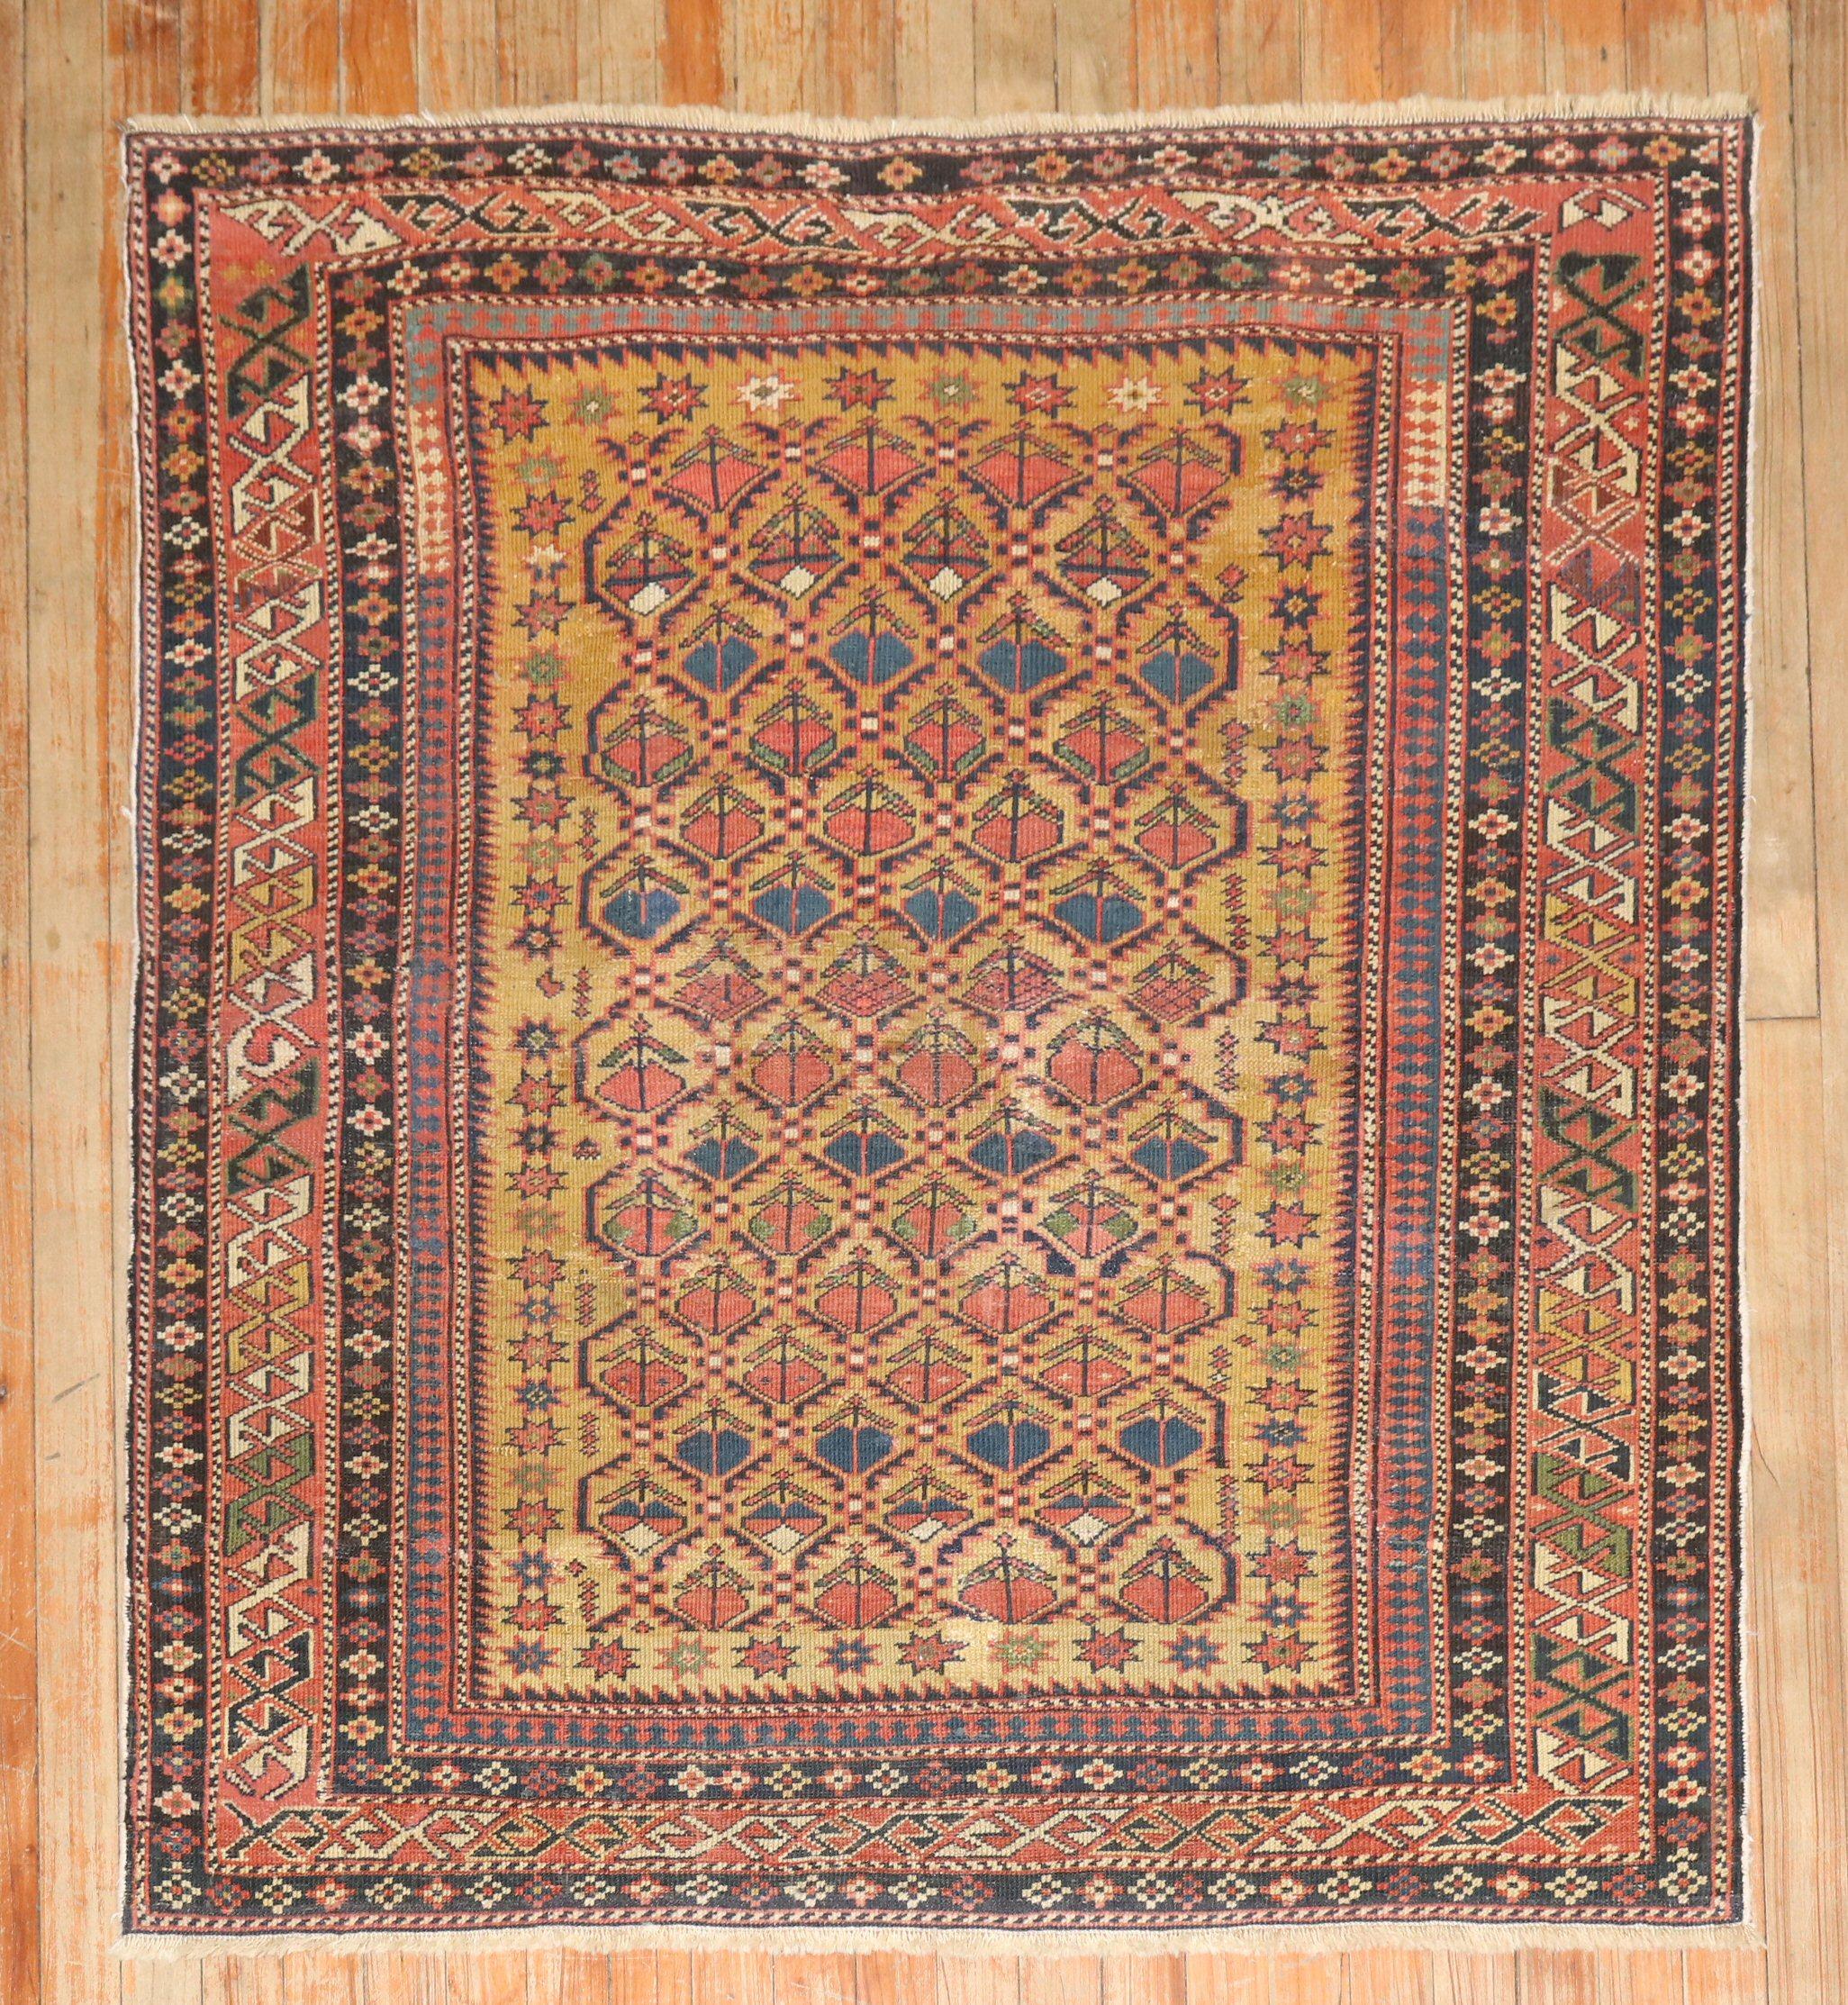 A fine quality late 19th century Caucasian Shirvan rug. 

Measures: 3'9